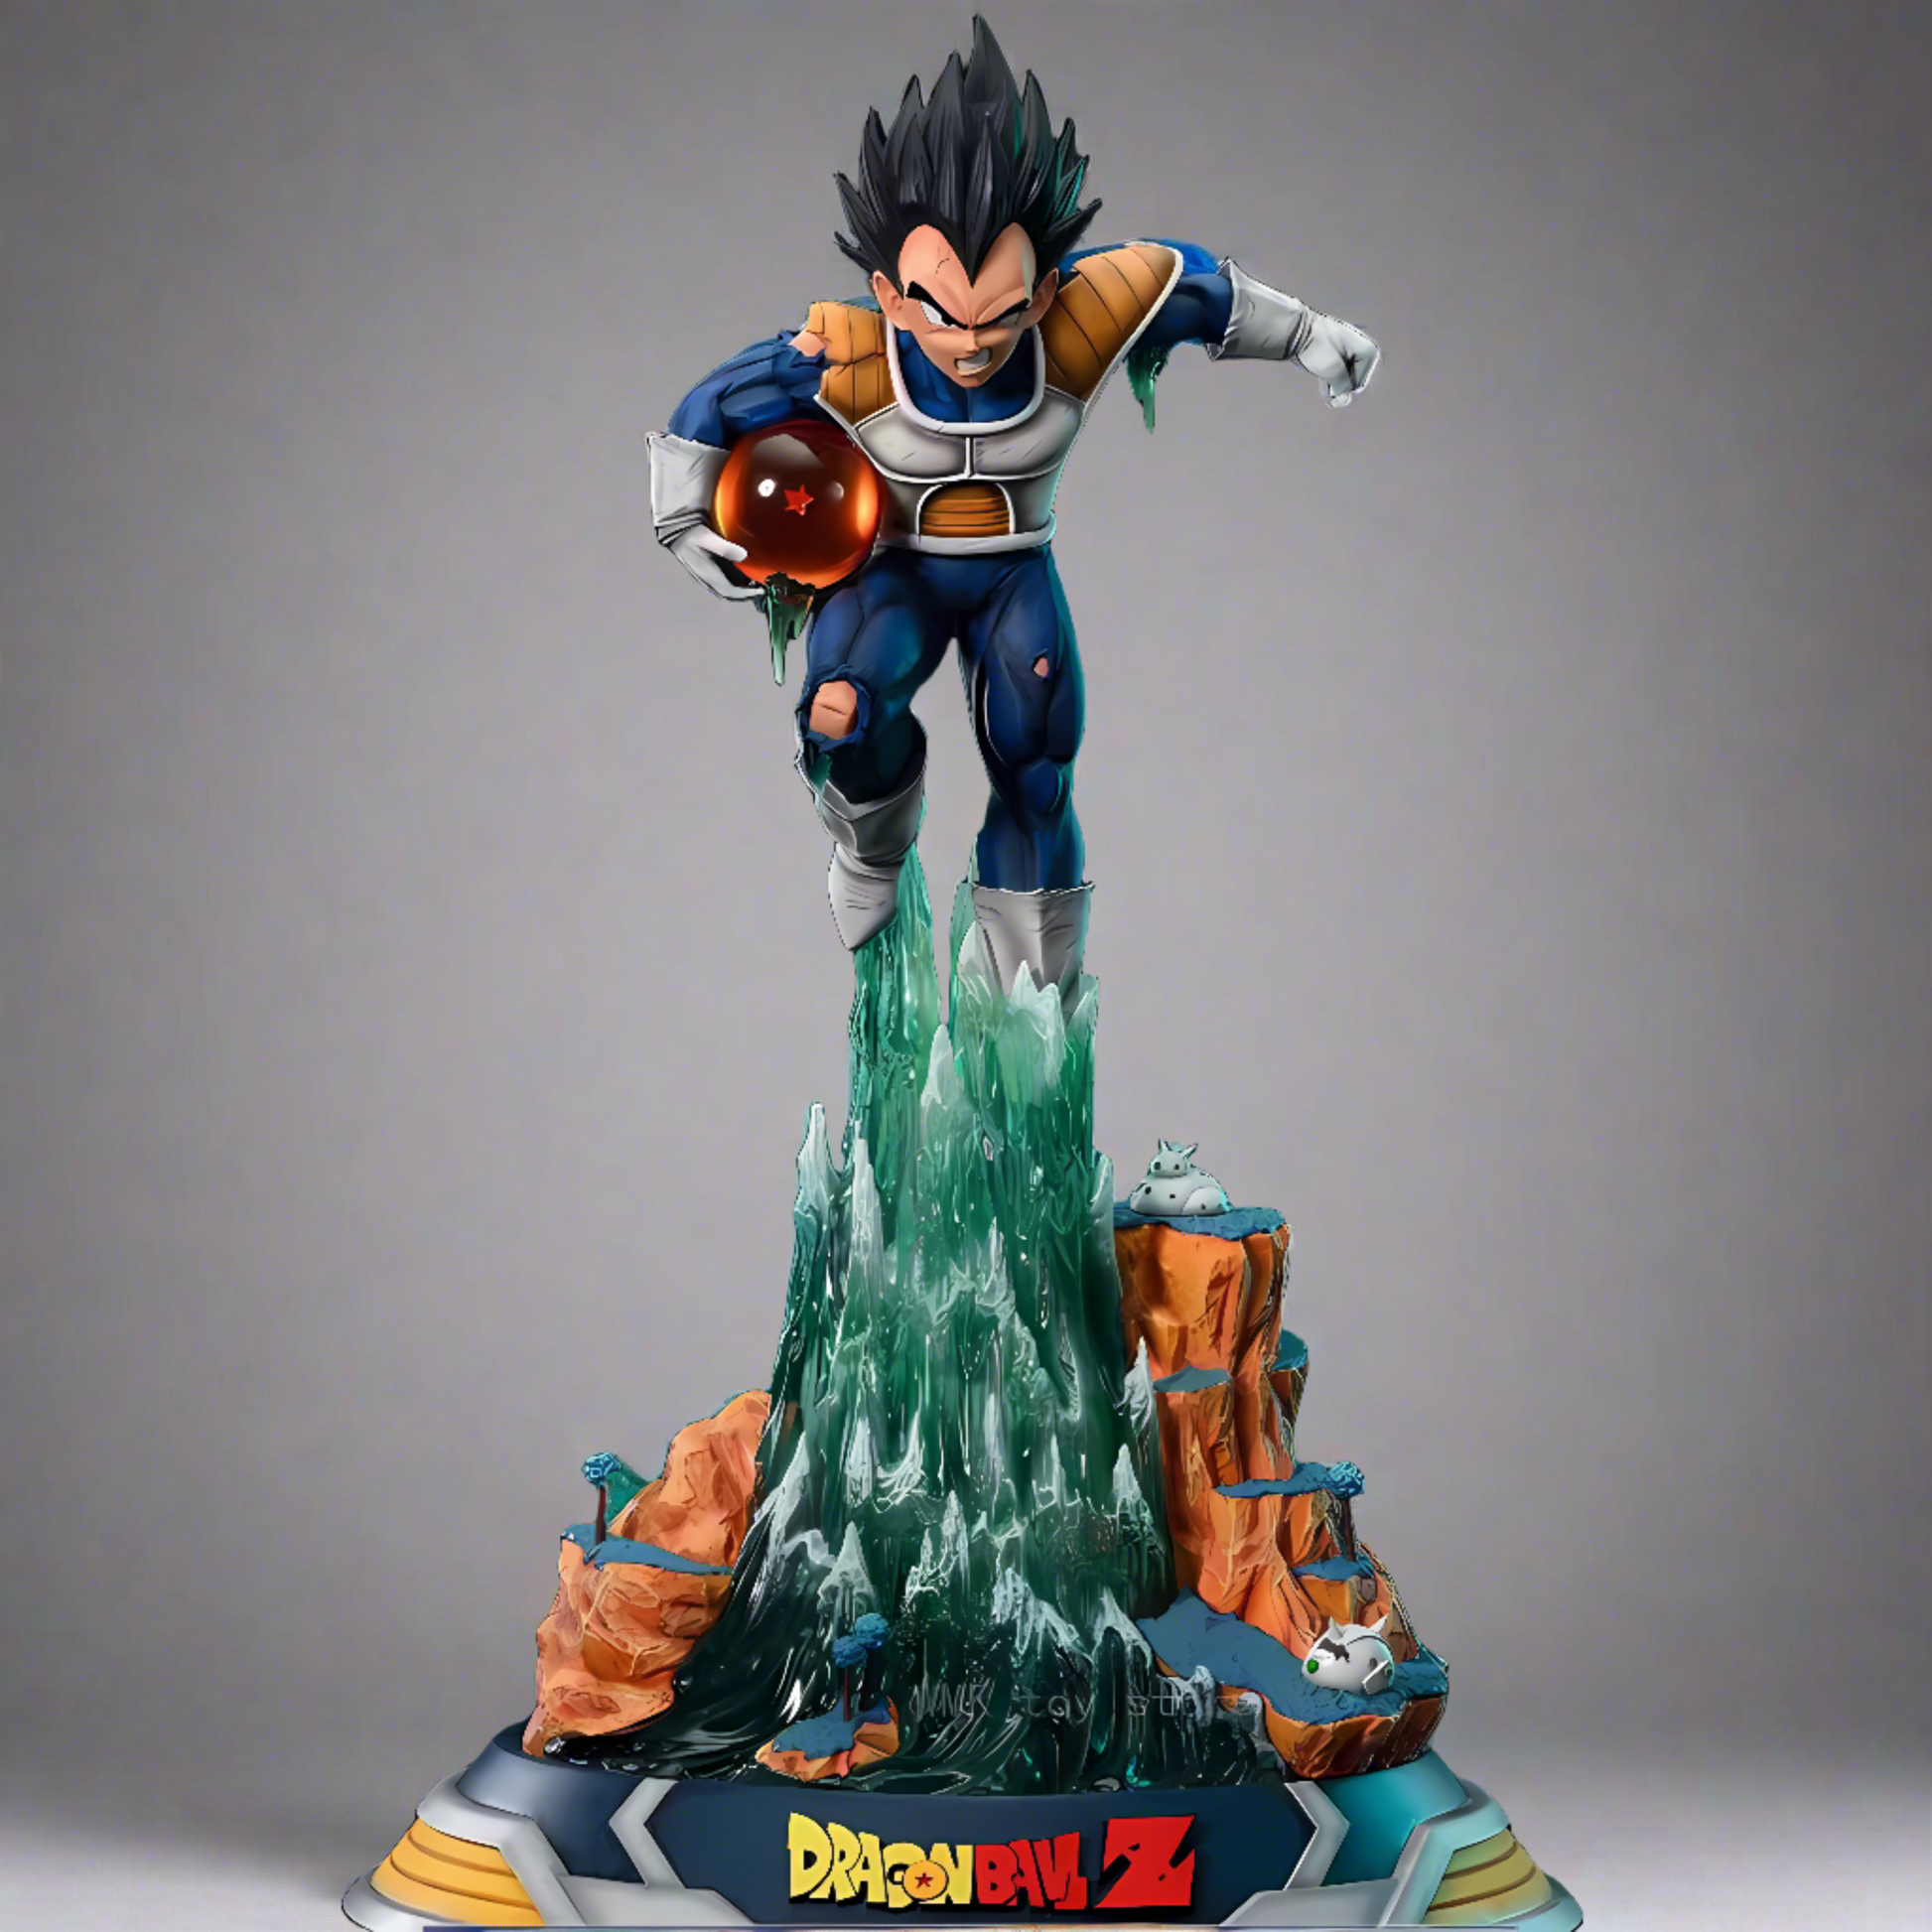 The Dragon Ball Z collectible figure of Energy Blast Vegeta stands atop a fountain of water, clutching a glowing four-star Dragon Ball. This detailed rendition of Vegeta features his signature Saiyan armor and confident smirk, against a dark background that makes the character and the cascading water burst vibrantly to life, with the 'DRAGON BALL Z' logo displayed prominently at the base.